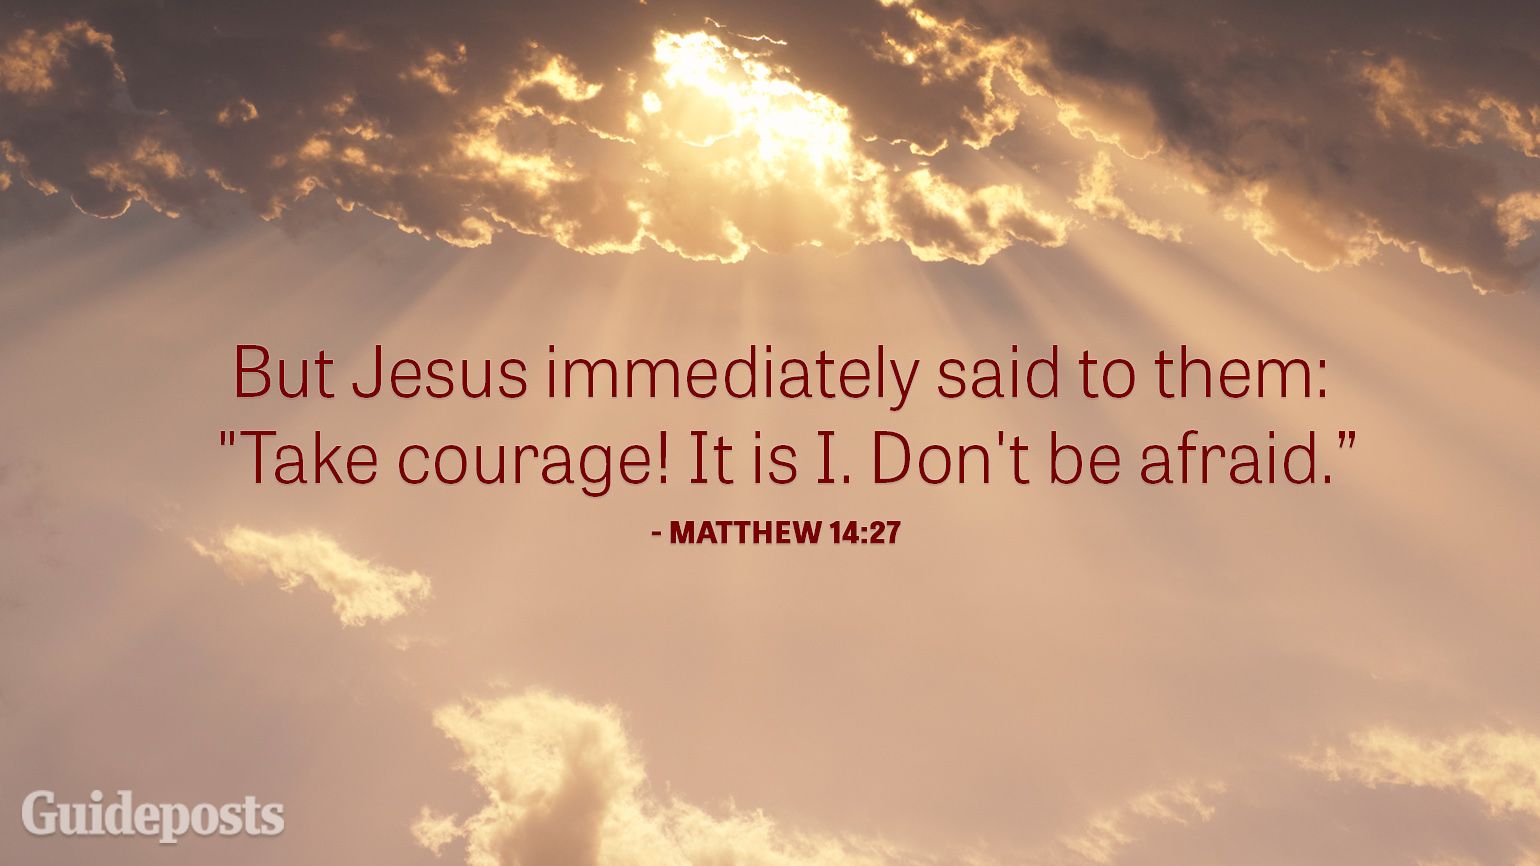 But Jesus immediately said to them: "Take courage. It is I. Don't be afraid."